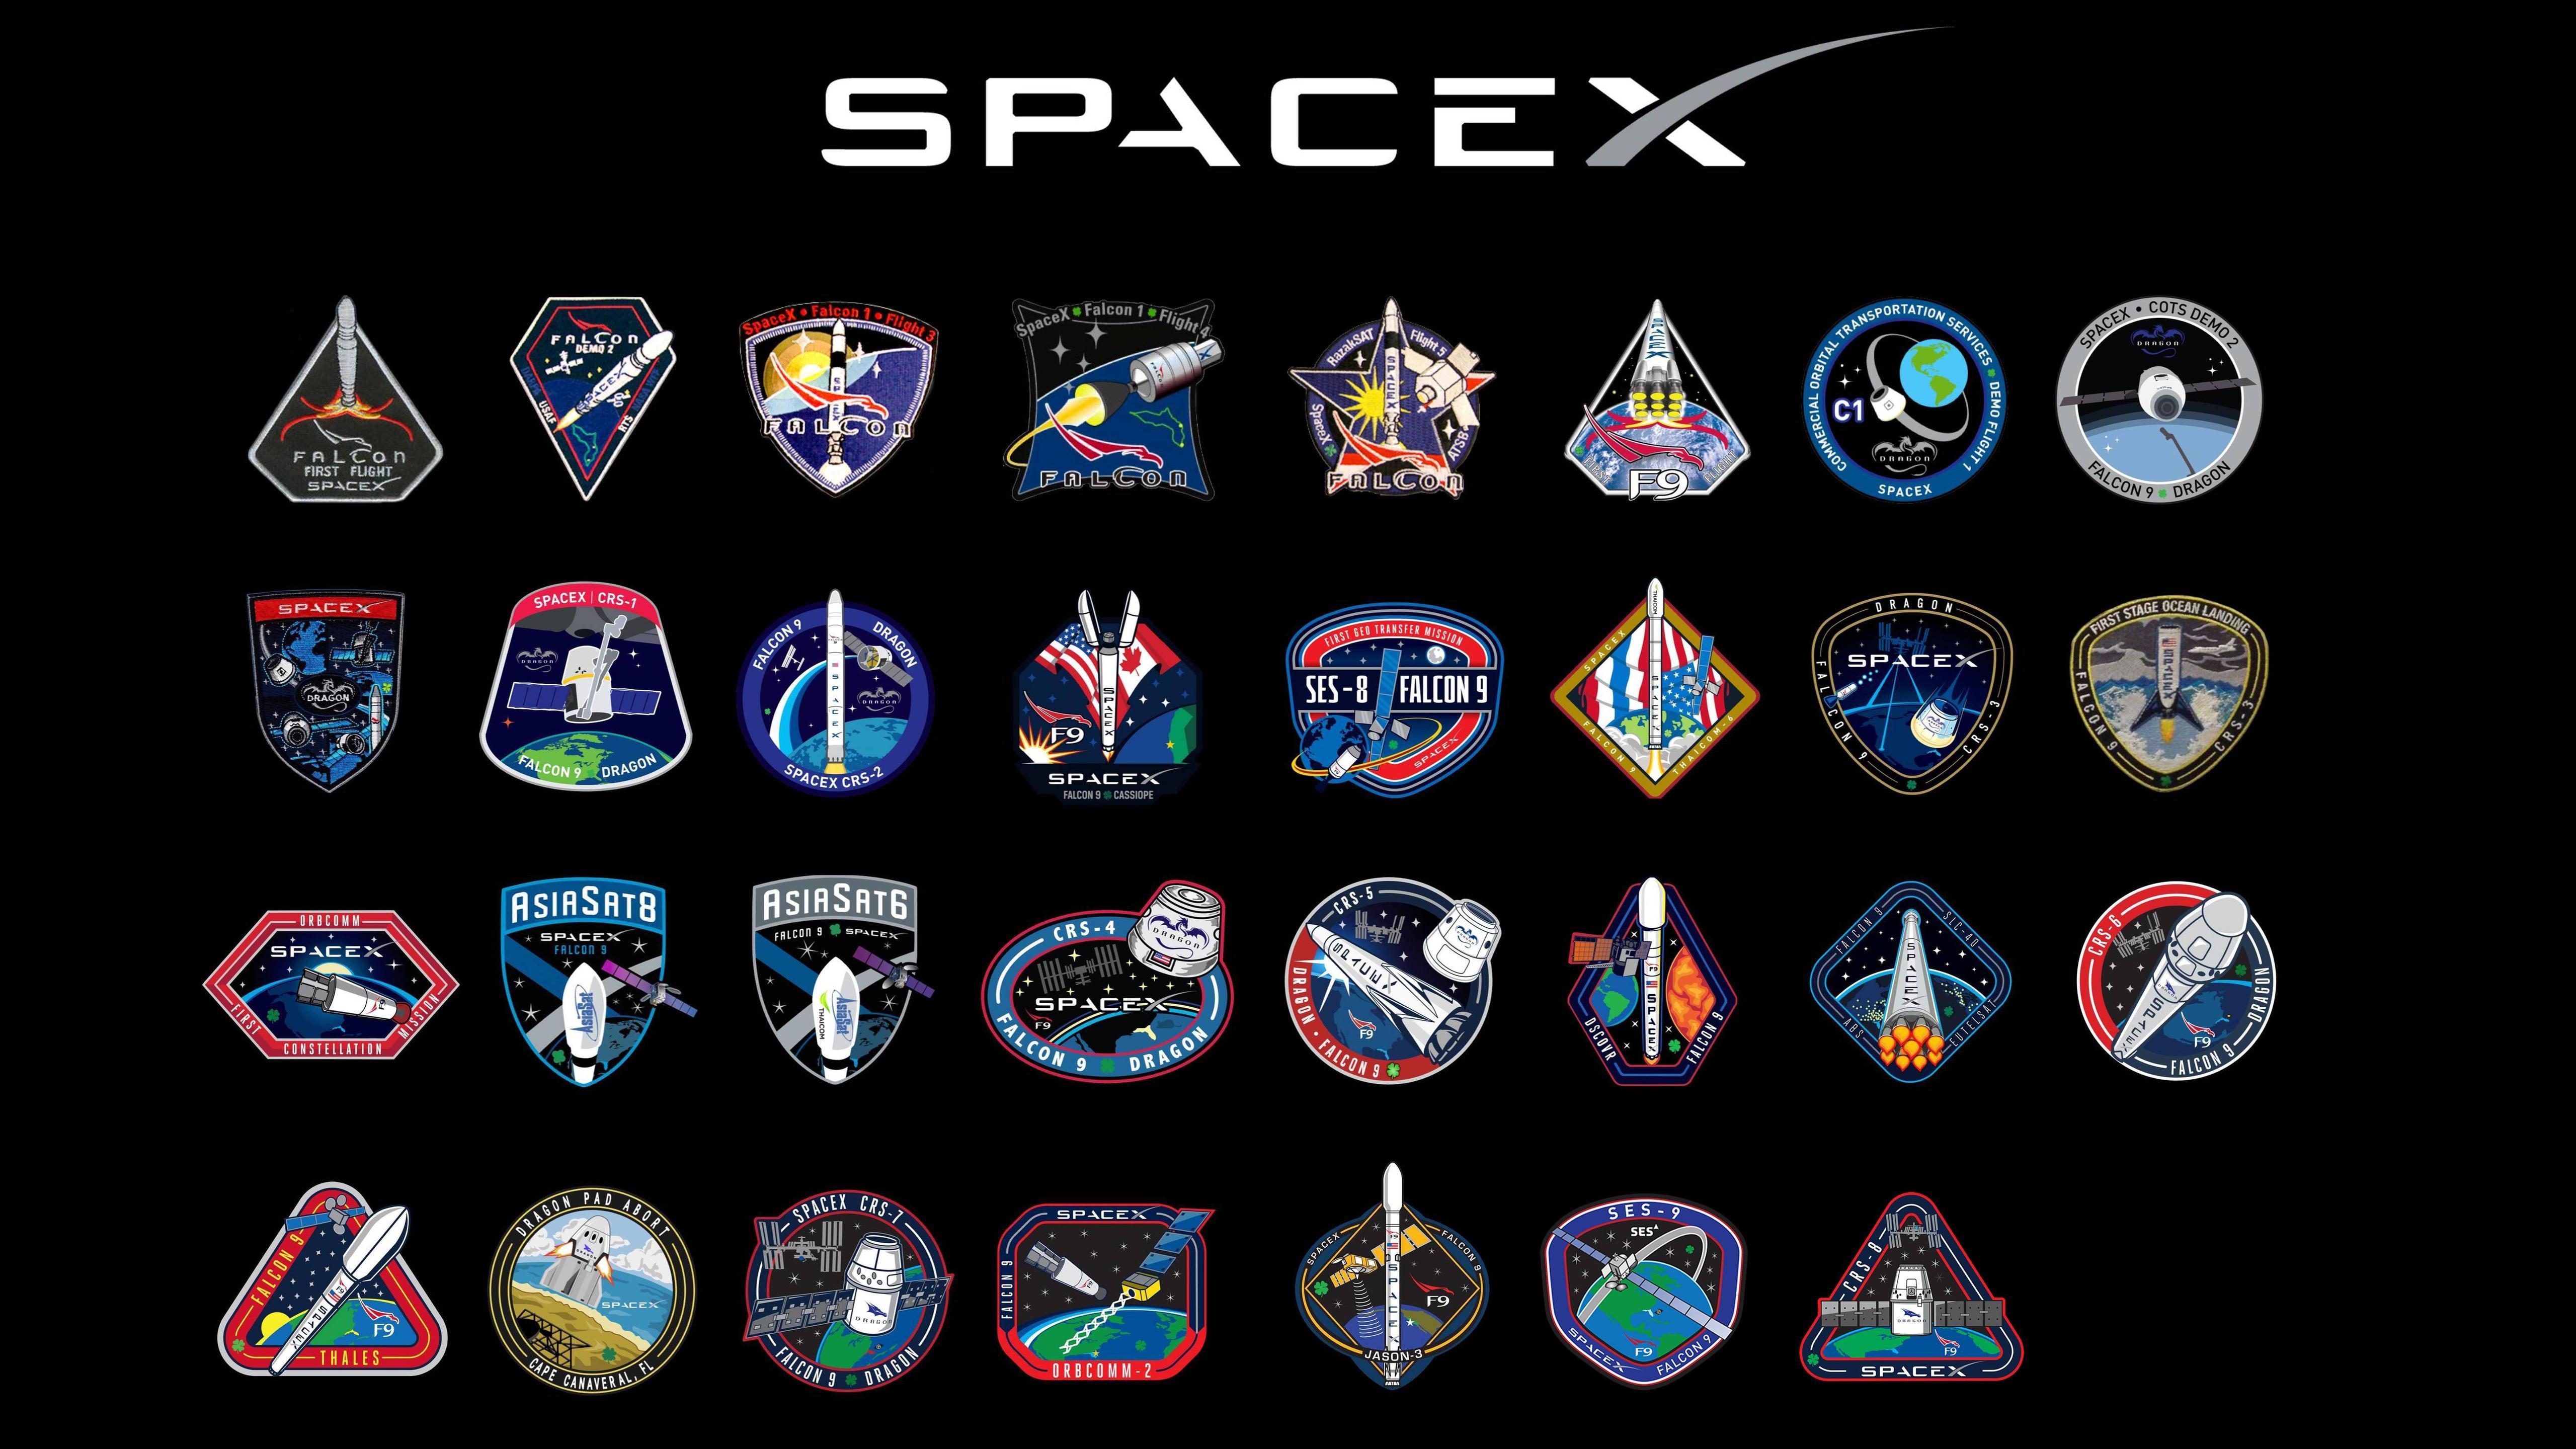 Falcon Heavy SpaceX Logo - SpaceX Mission Patch Wallpaper (16:9) : spacex